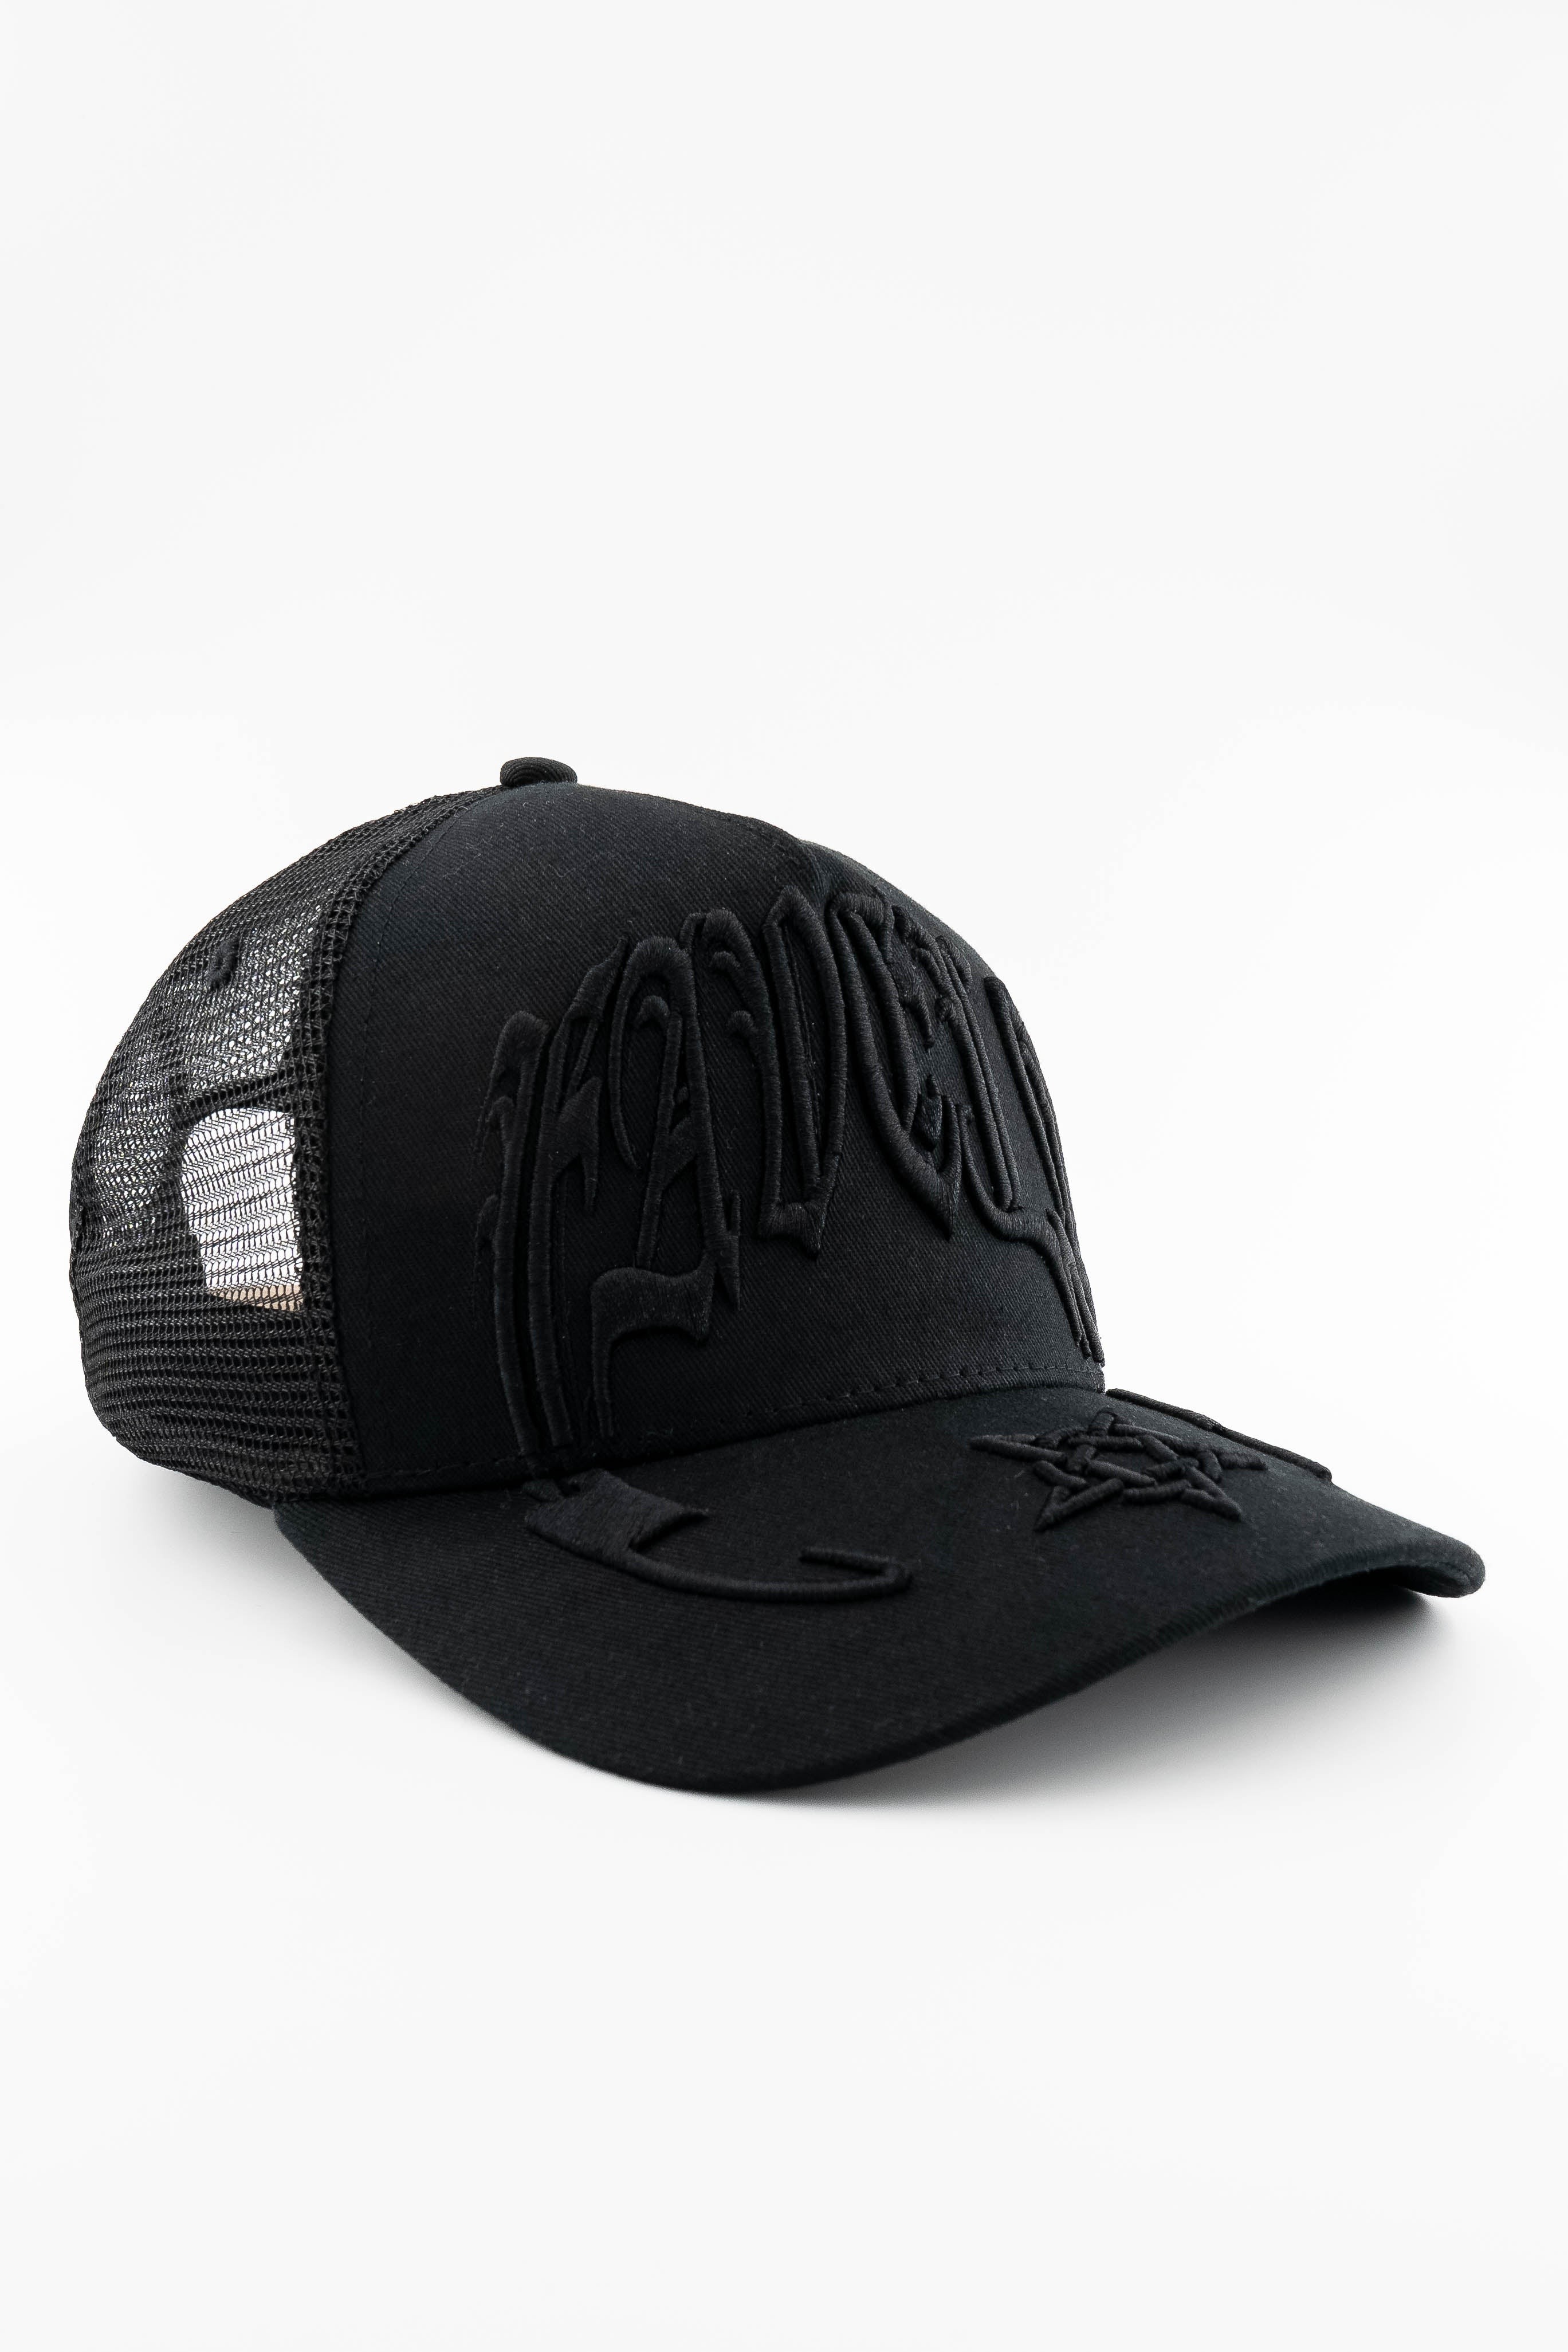 Embroidered Trucker Cap (TRCKR1)